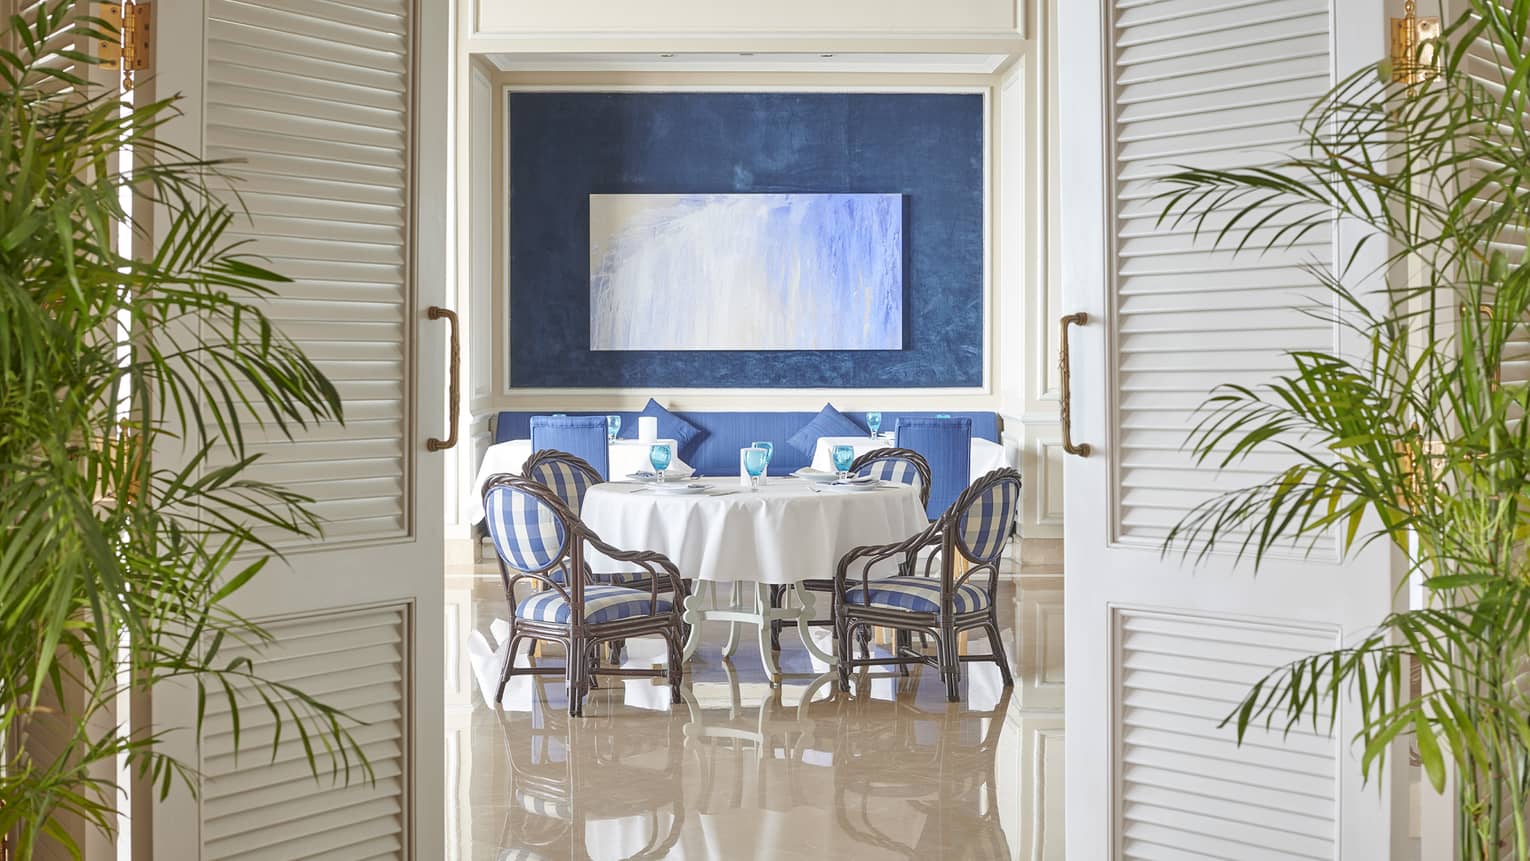 Kala Restaurant dining area with blue accents and palm plants